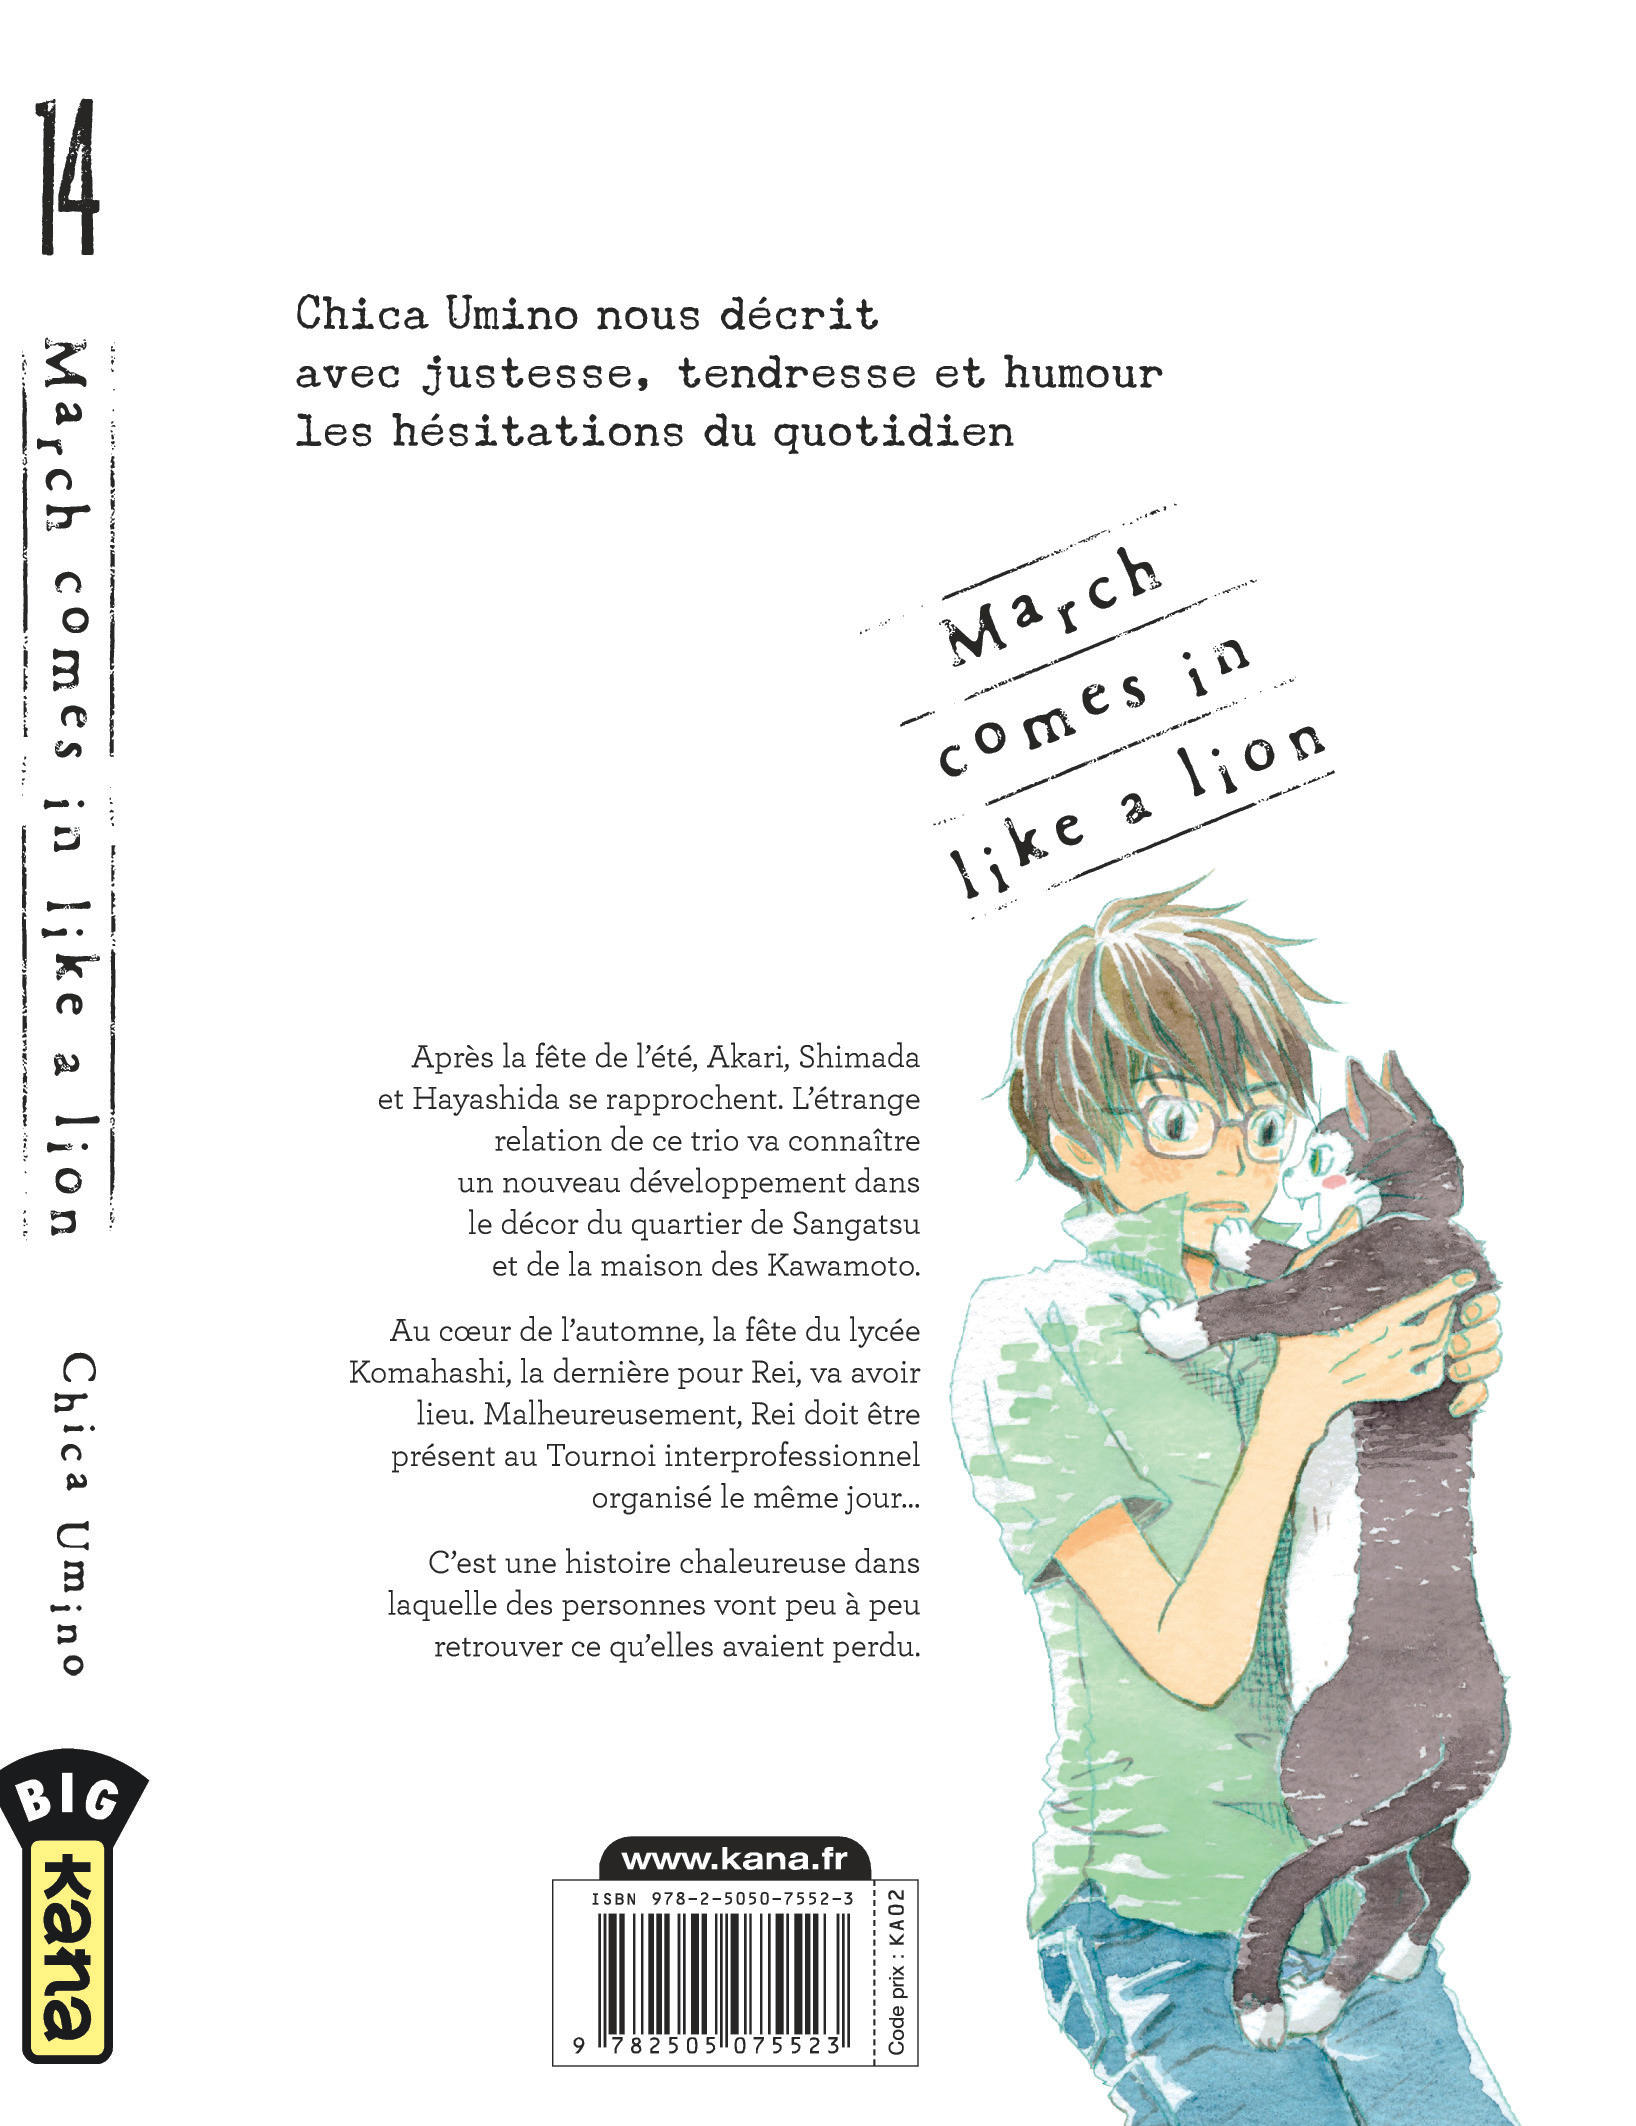 March comes in like a lion – Tome 14 - 4eme